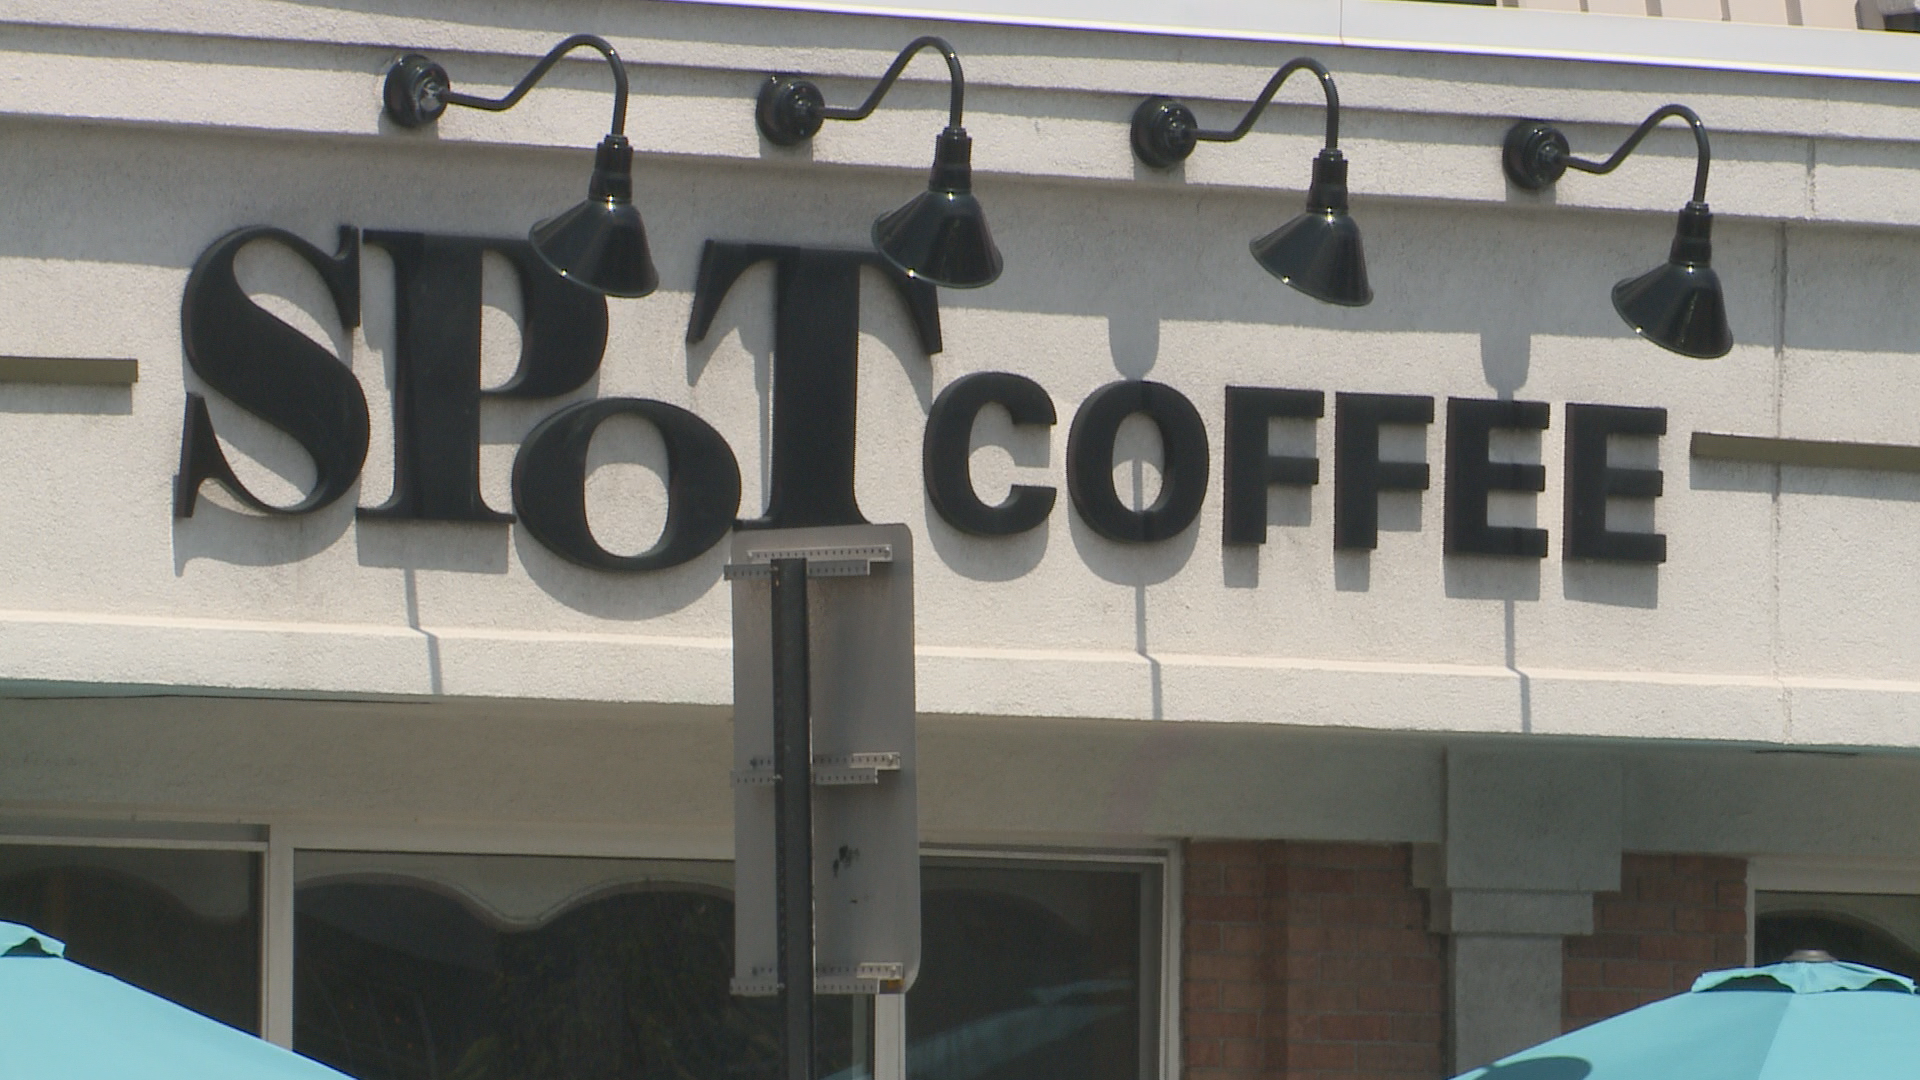 A Niagara Falls franchisee will become the first to serve alcohol at a Spot Coffee.